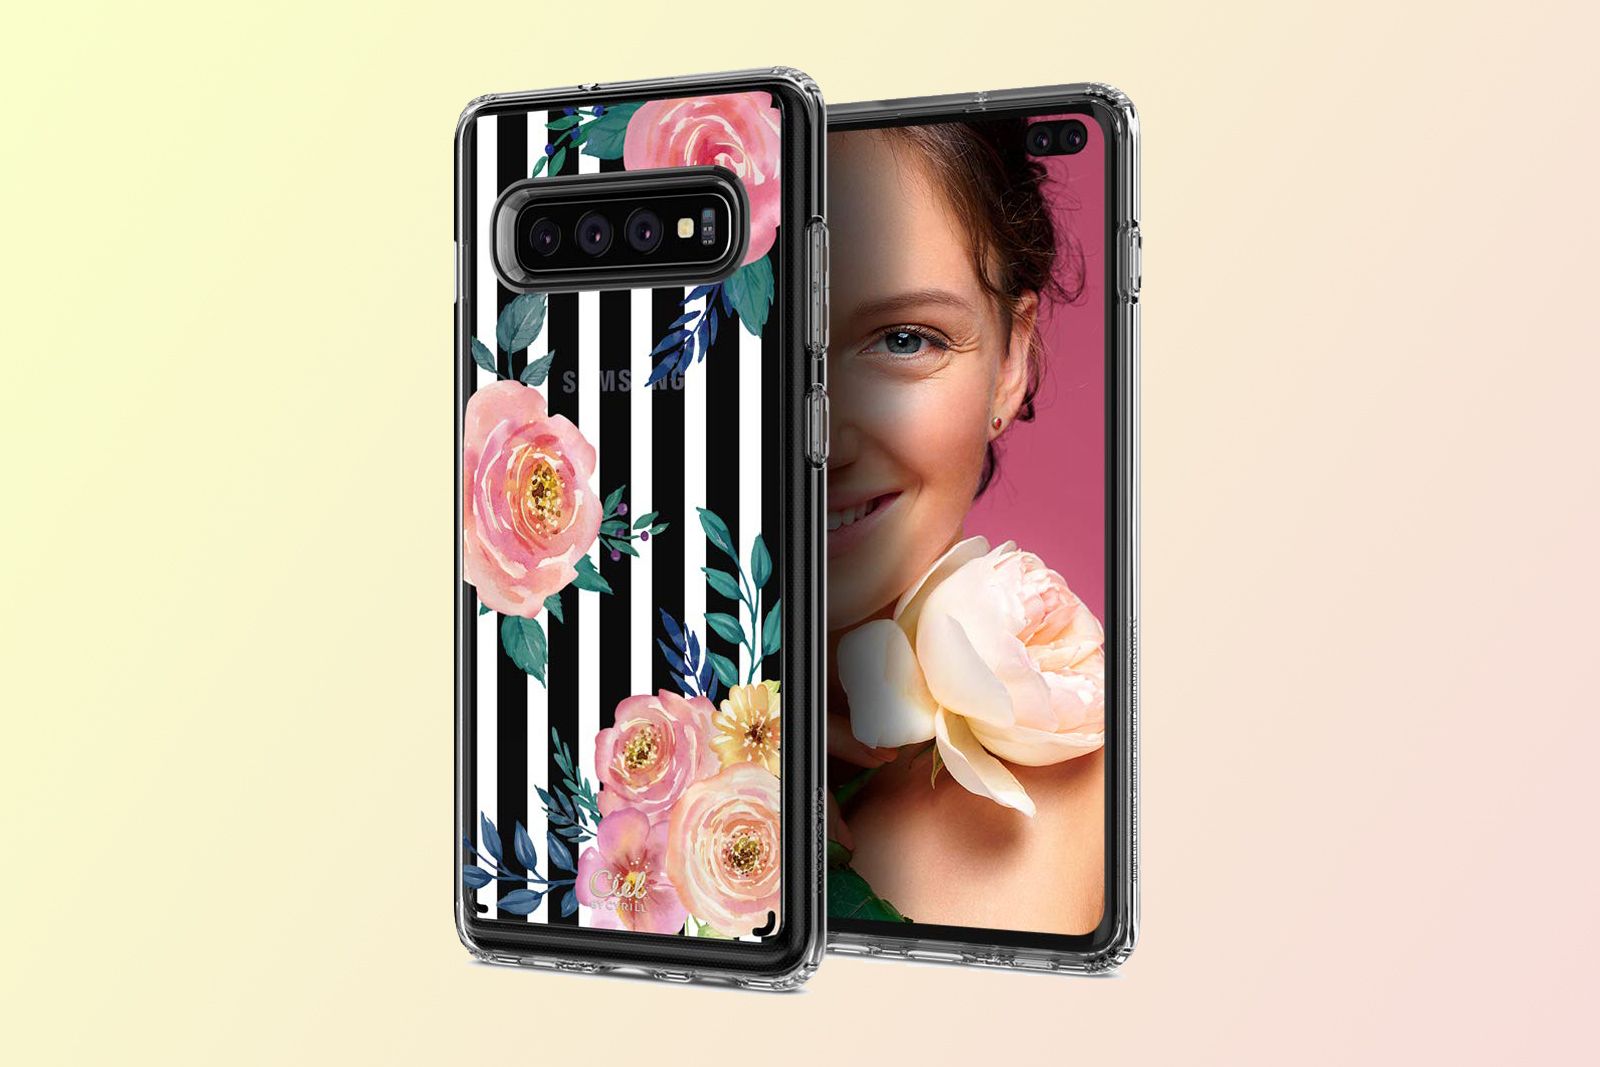 Best Galaxy S10e S10 And S10 Cases Protect Your New Samsung Device image 15